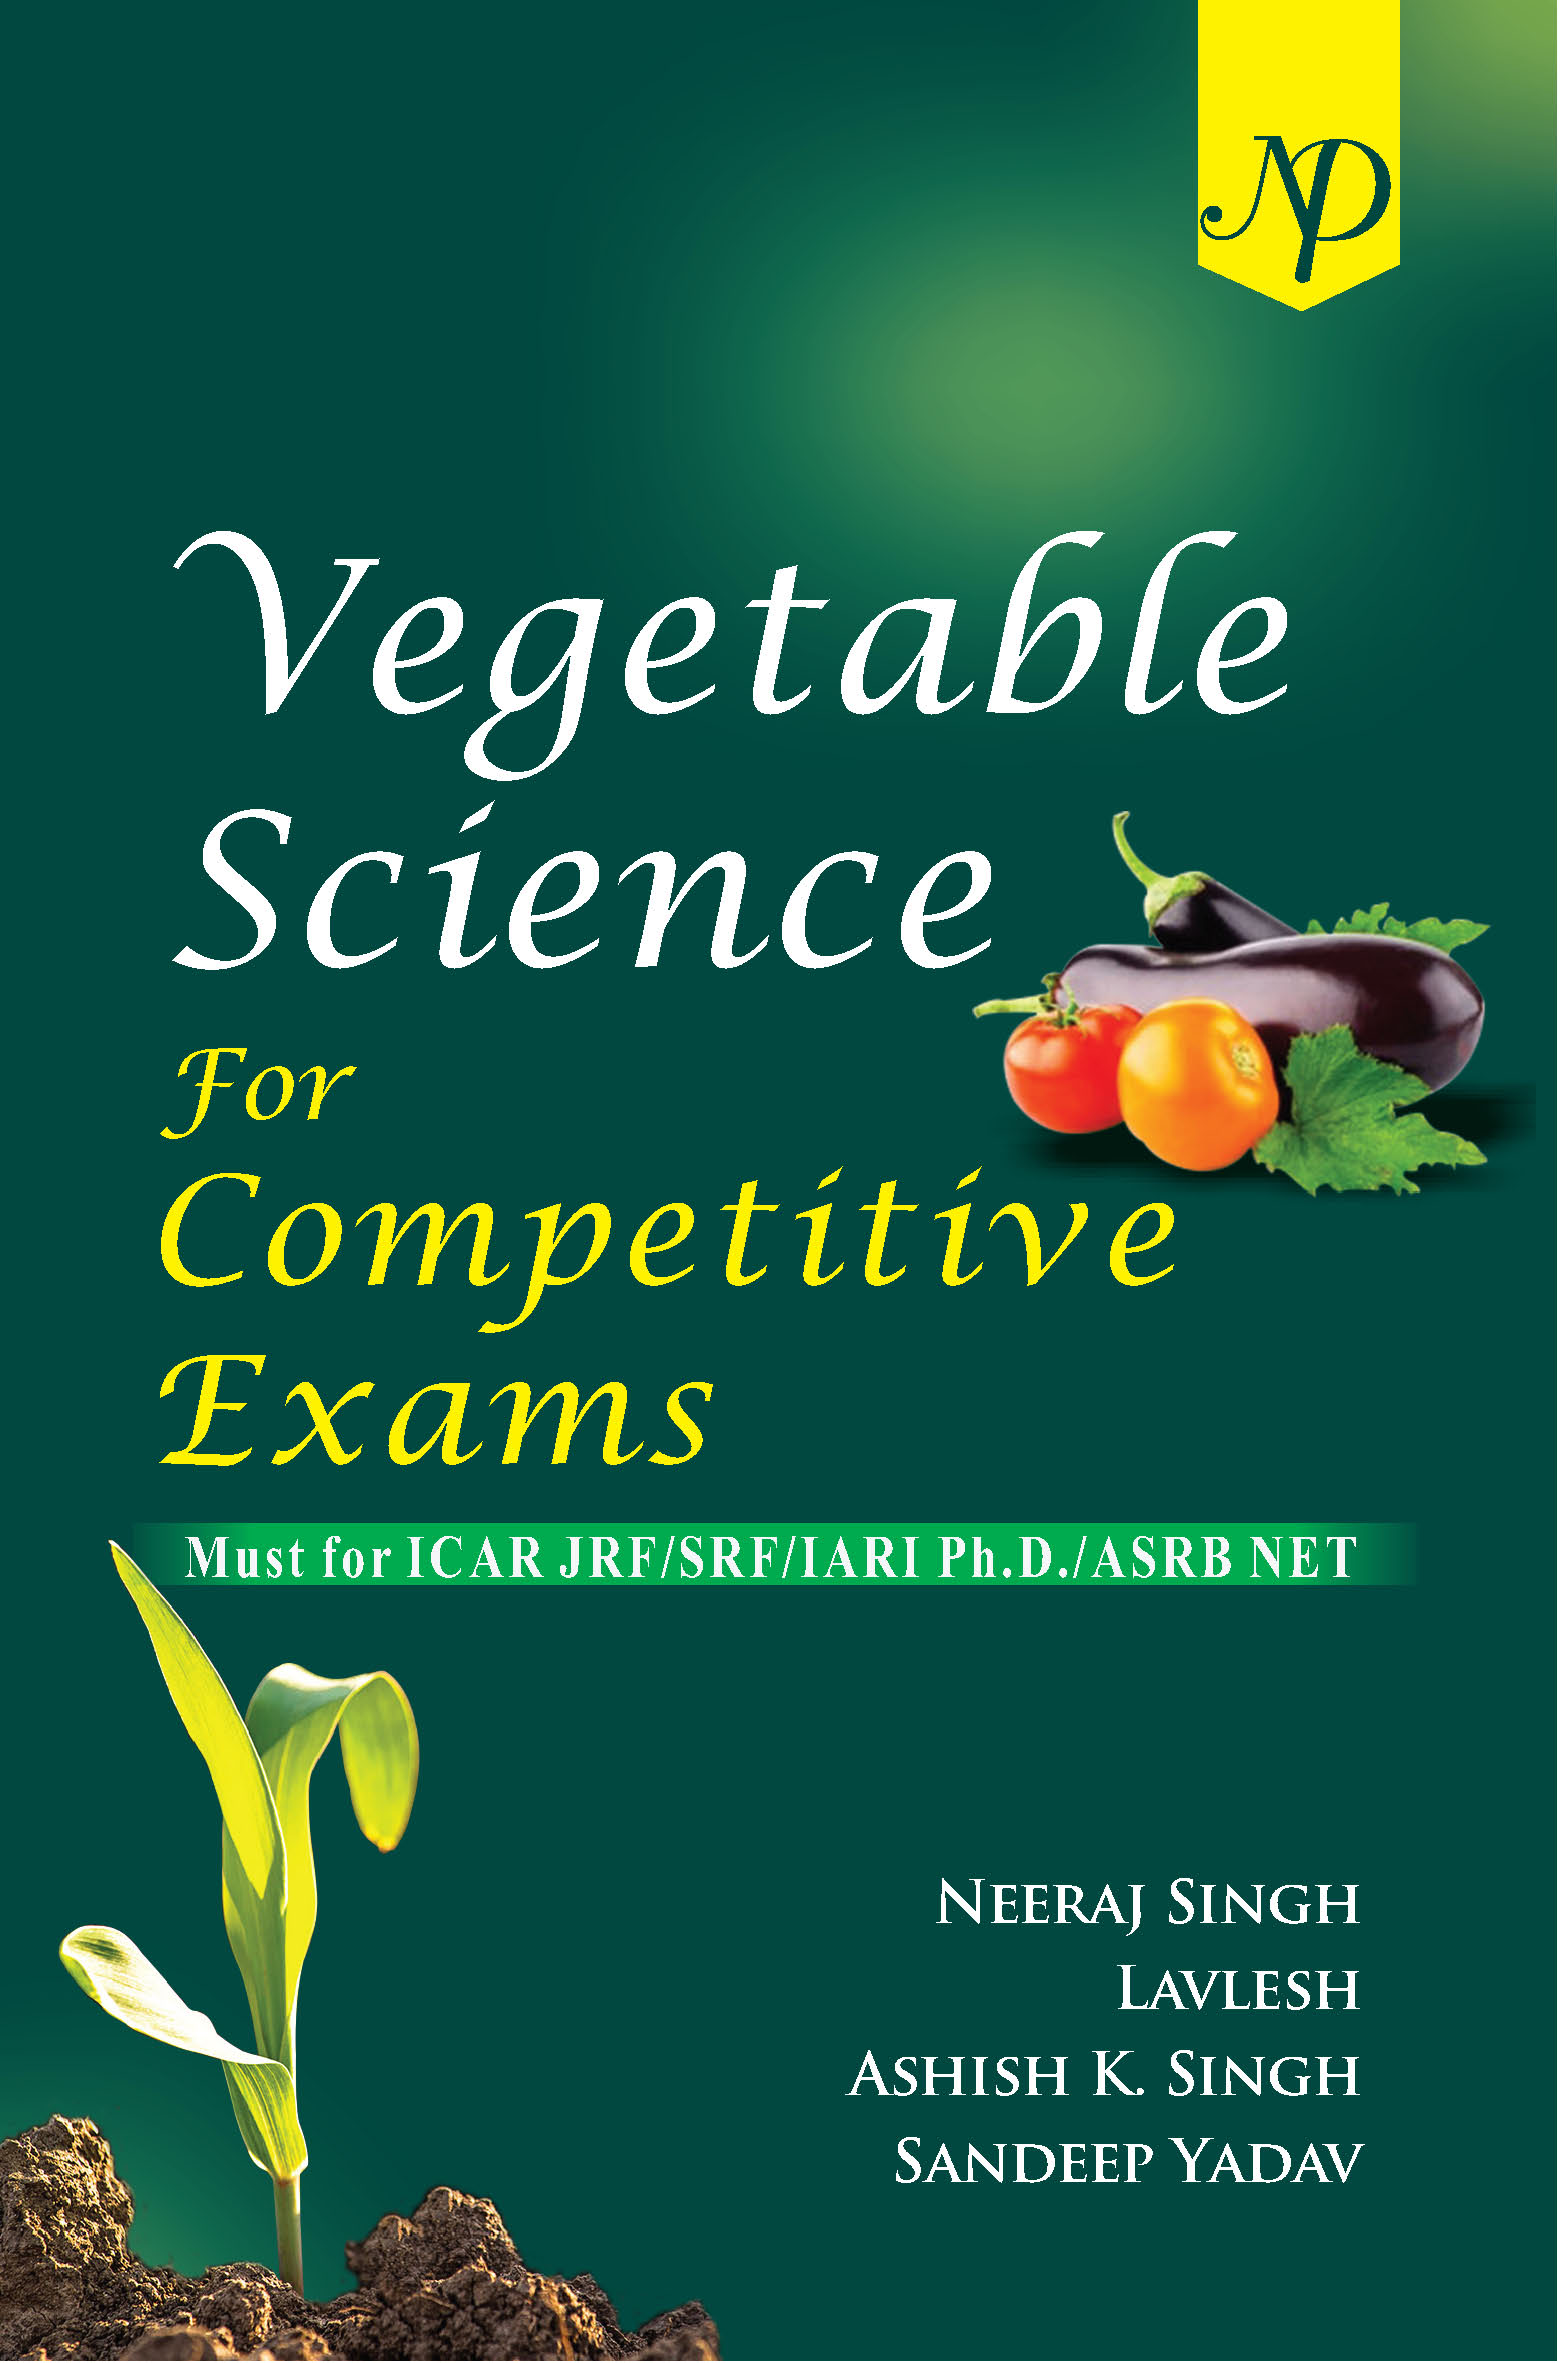 Vegetable Science for Competitive Exams: Must for ICAR JRF/SRF/IARI Ph.D./ASRB NET